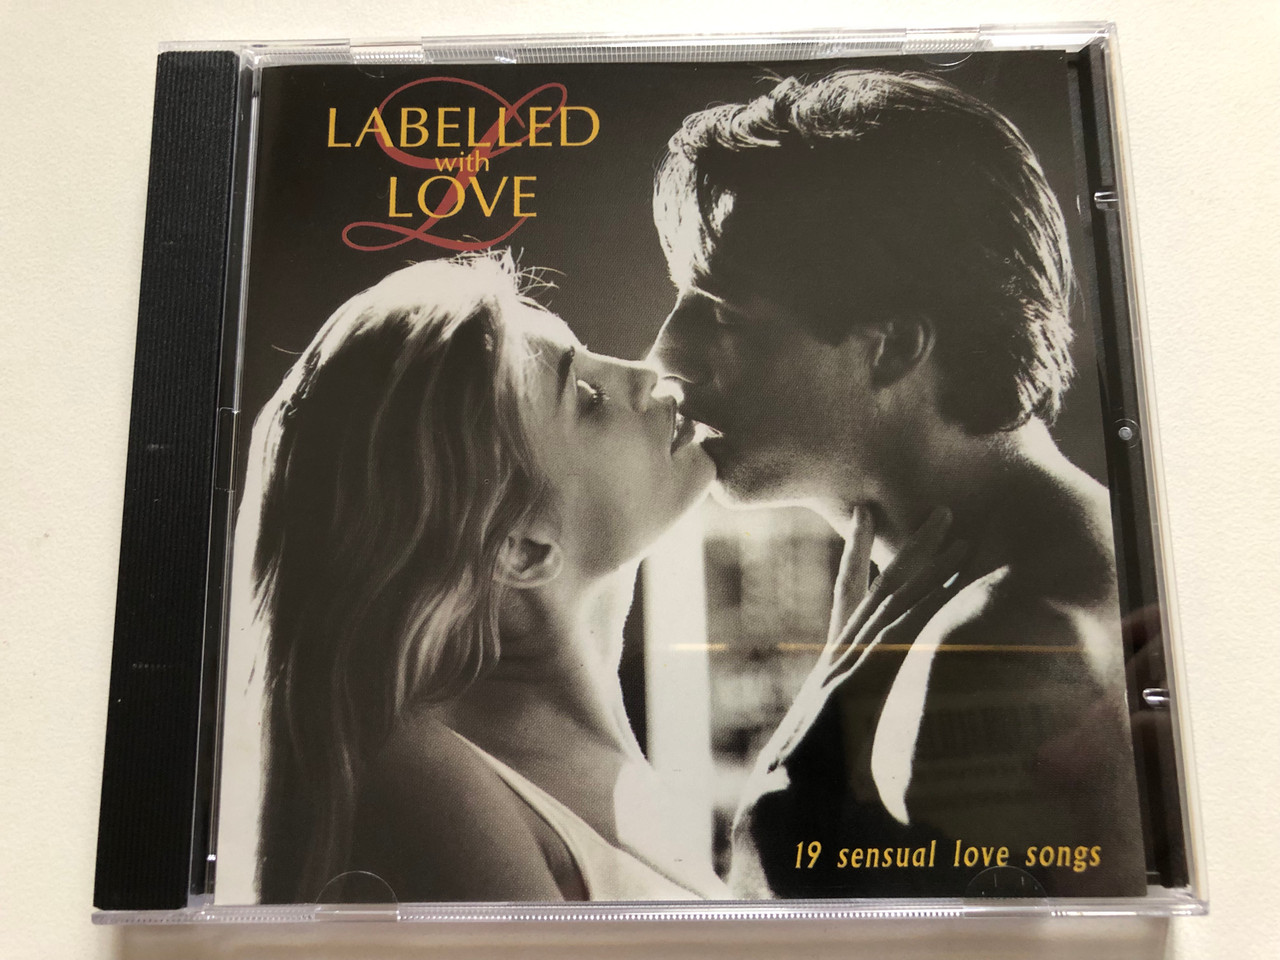 https://cdn10.bigcommerce.com/s-62bdpkt7pb/products/0/images/310538/Labelled_With_Love_-_19_Sensual_Love_Songs_AM_Records_Audio_CD_1994_540_266_2_1__18153.1699382337.1280.1280.JPG?c=2